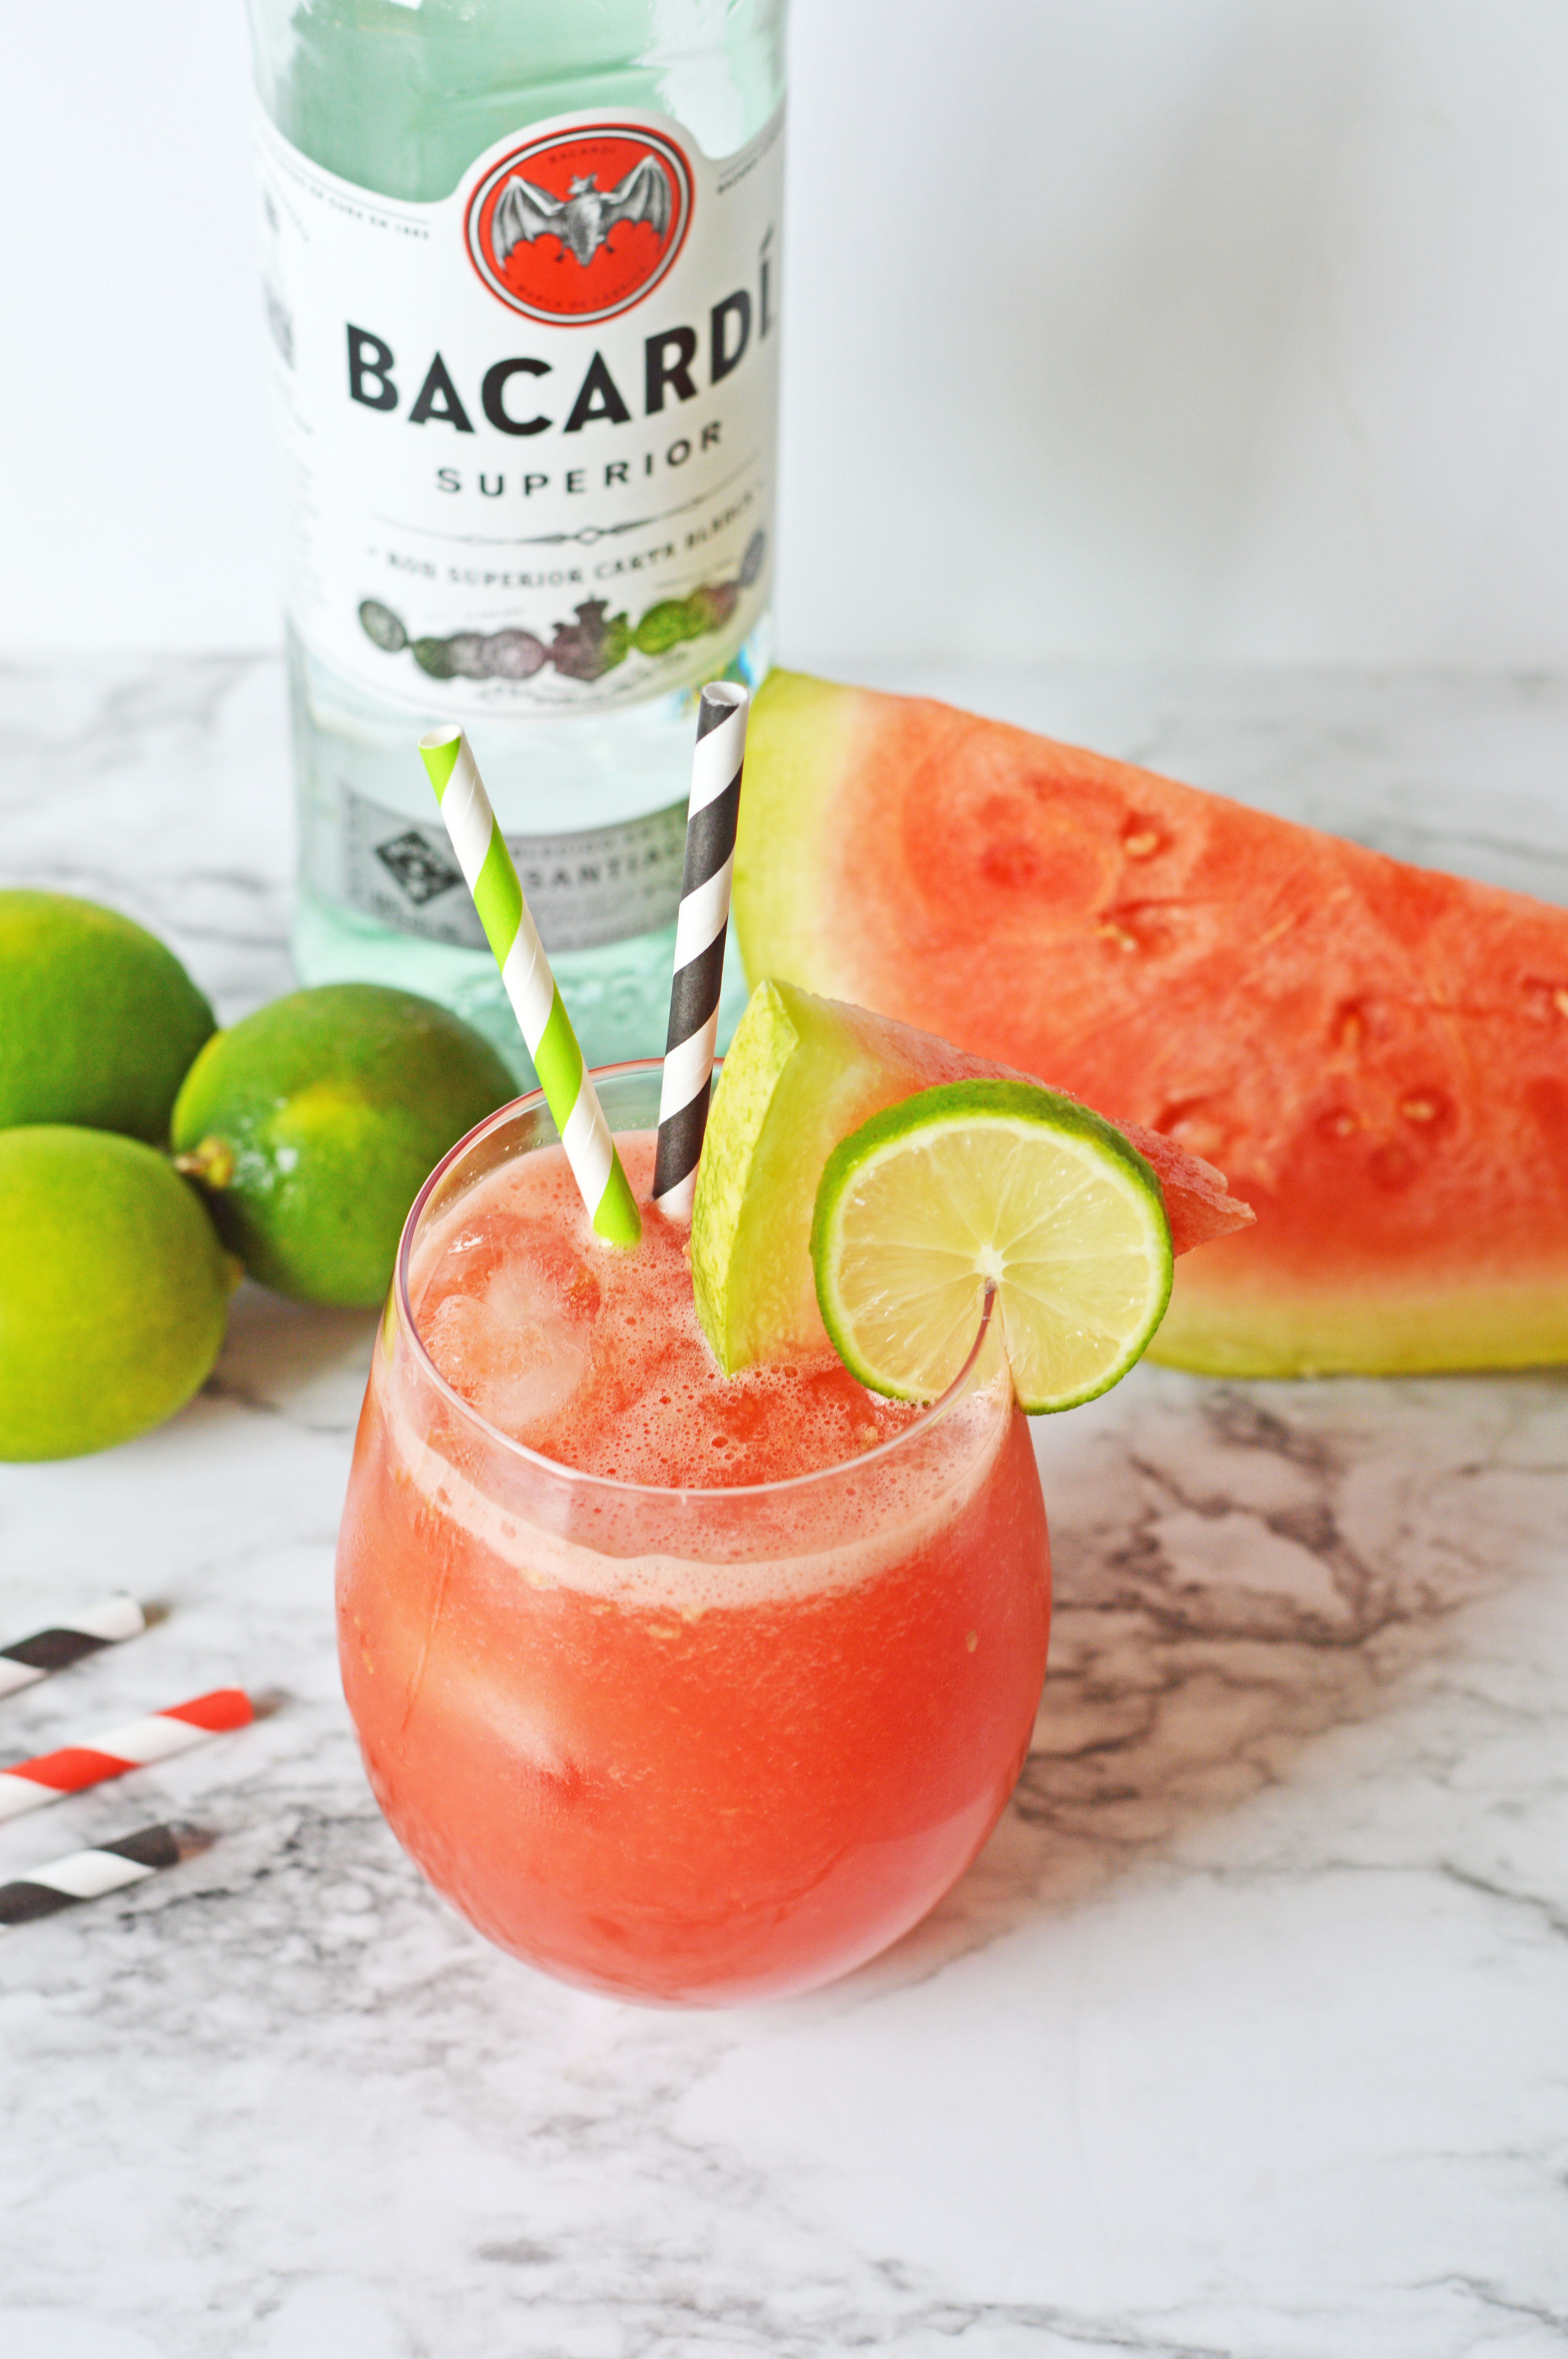 ALT Glass on a worktop with a pink watermelon rum punch in it with two stripy straws in the glass and a slice of lime and watermelon on the rim of the glass. There is a bottle of Bacardi rum in the background next to limes and slices of watermelon.